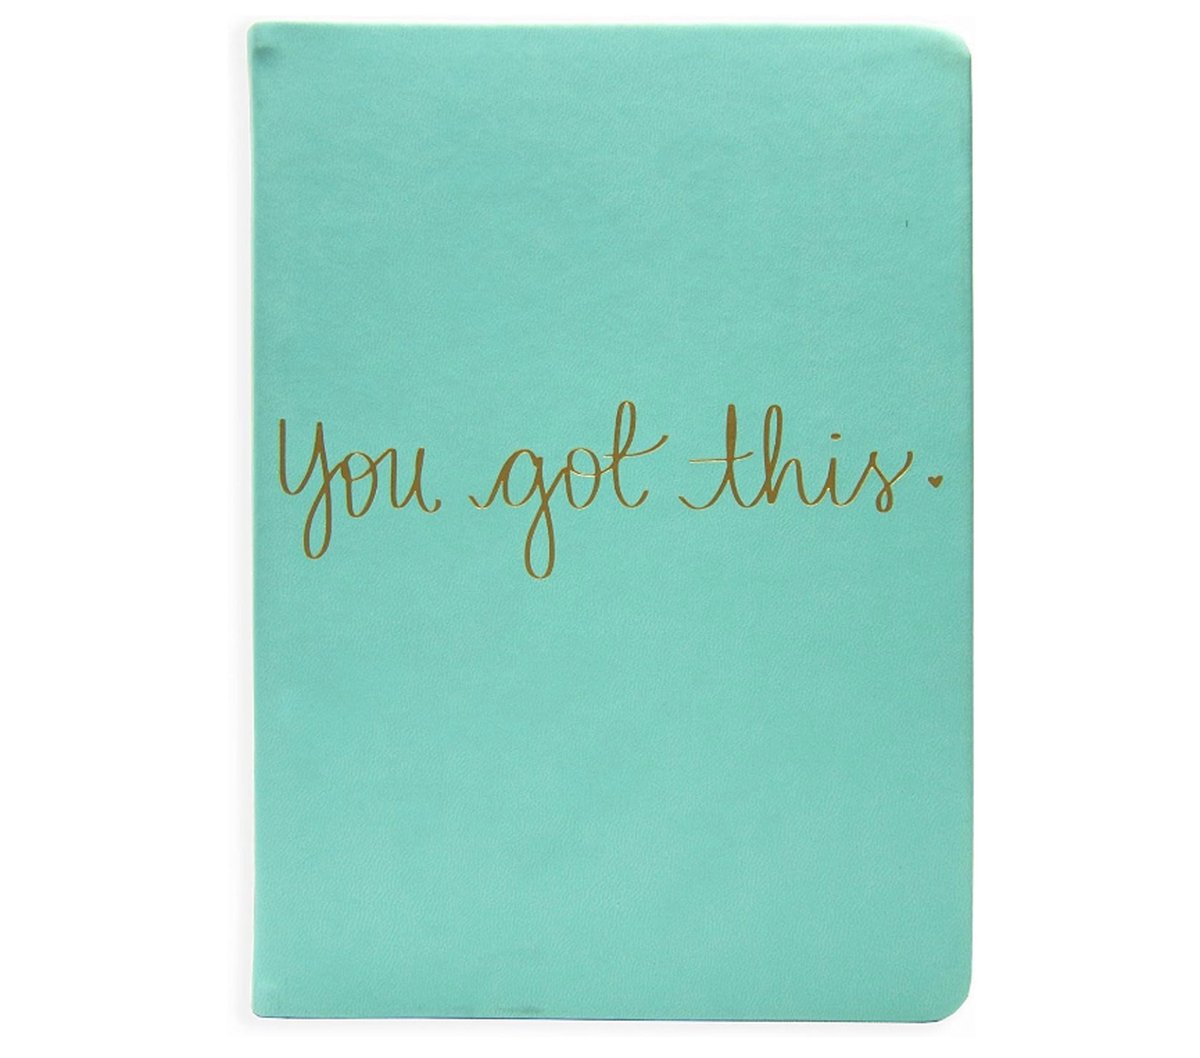 Eccolo Dayna Lee Collection Mint “You Got This” 8x6